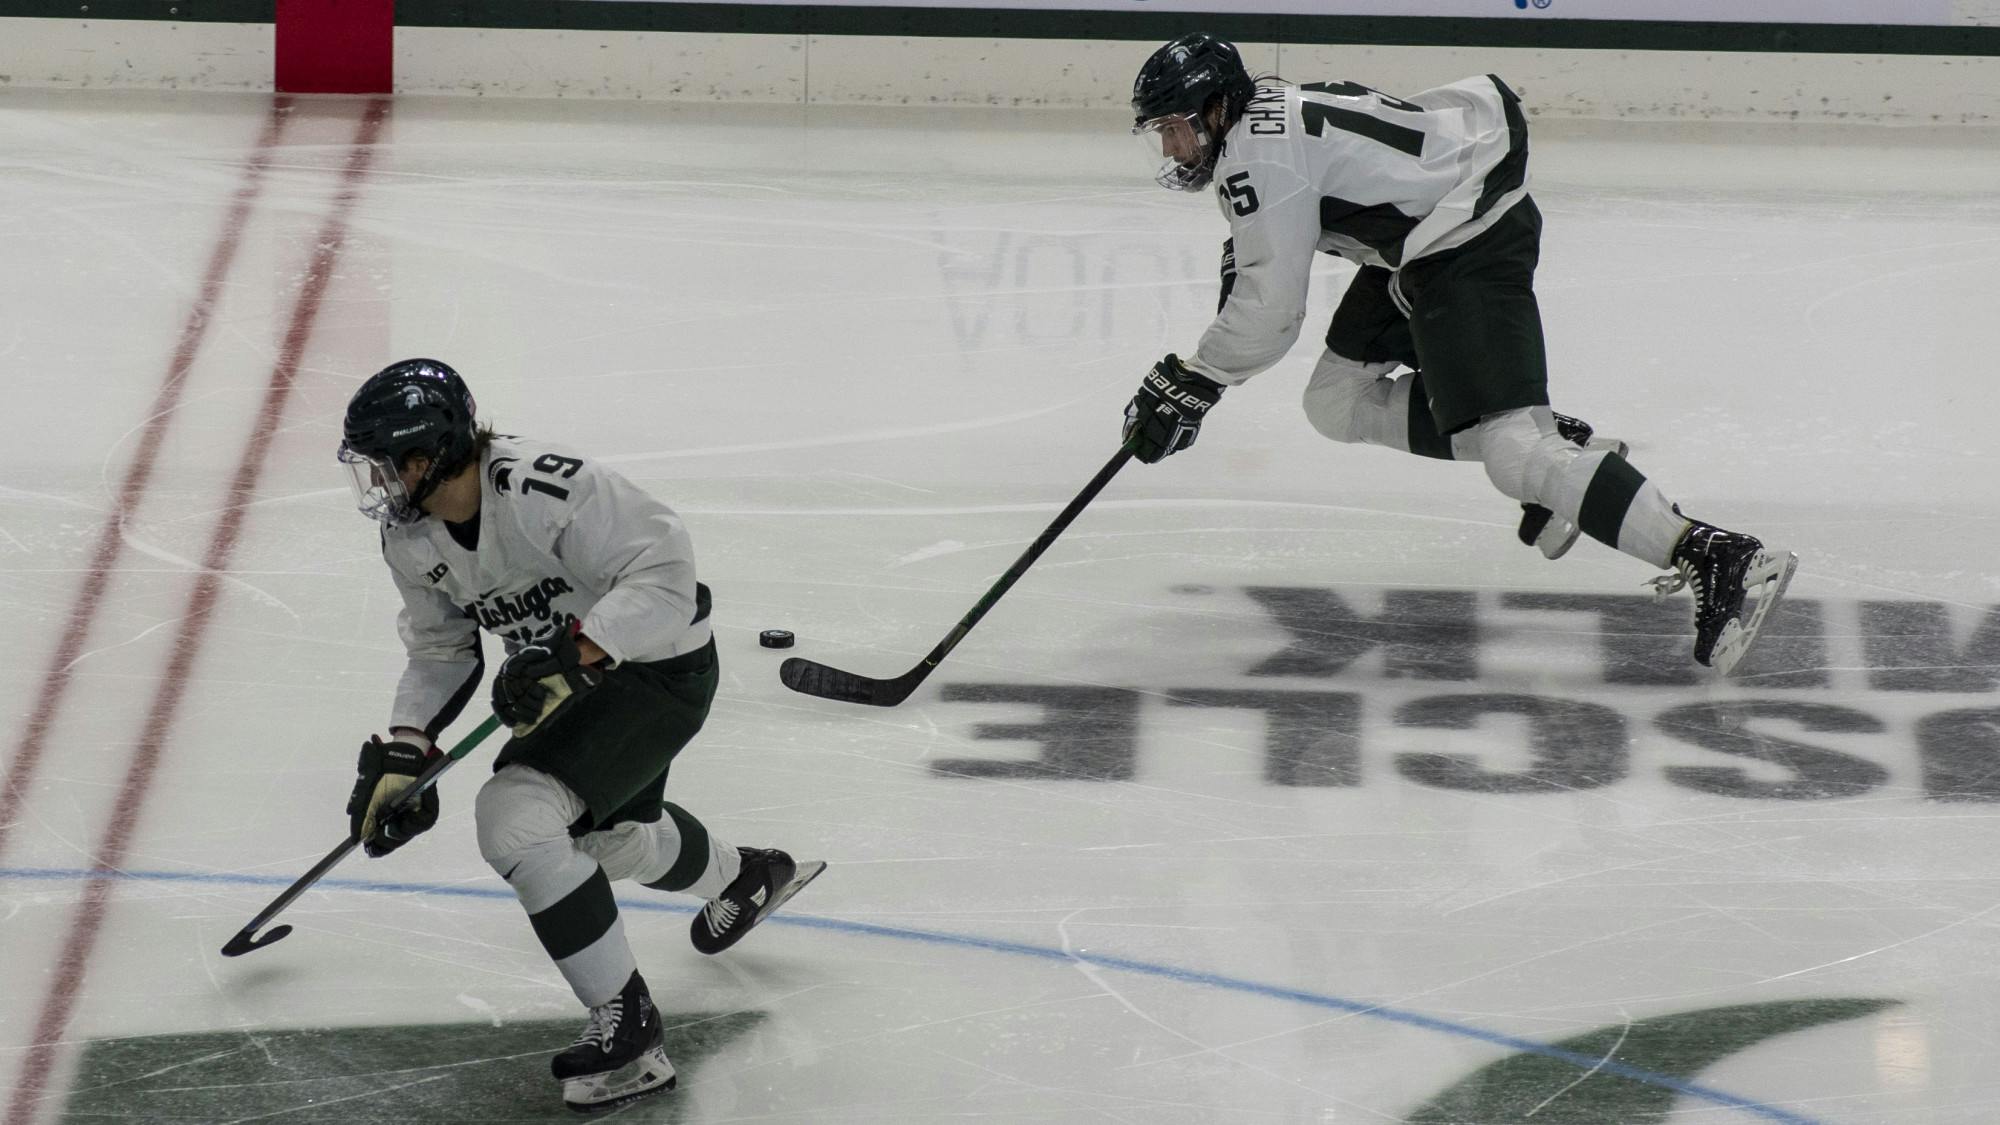 Junior left defenseman Christian Krygier (15) and sophomore right wing Nicolas Müller (19) pass the puck back and forth to each other during the third period. The Spartans triumphed against the Sun Devils, 2-0, on November 20, 2020.